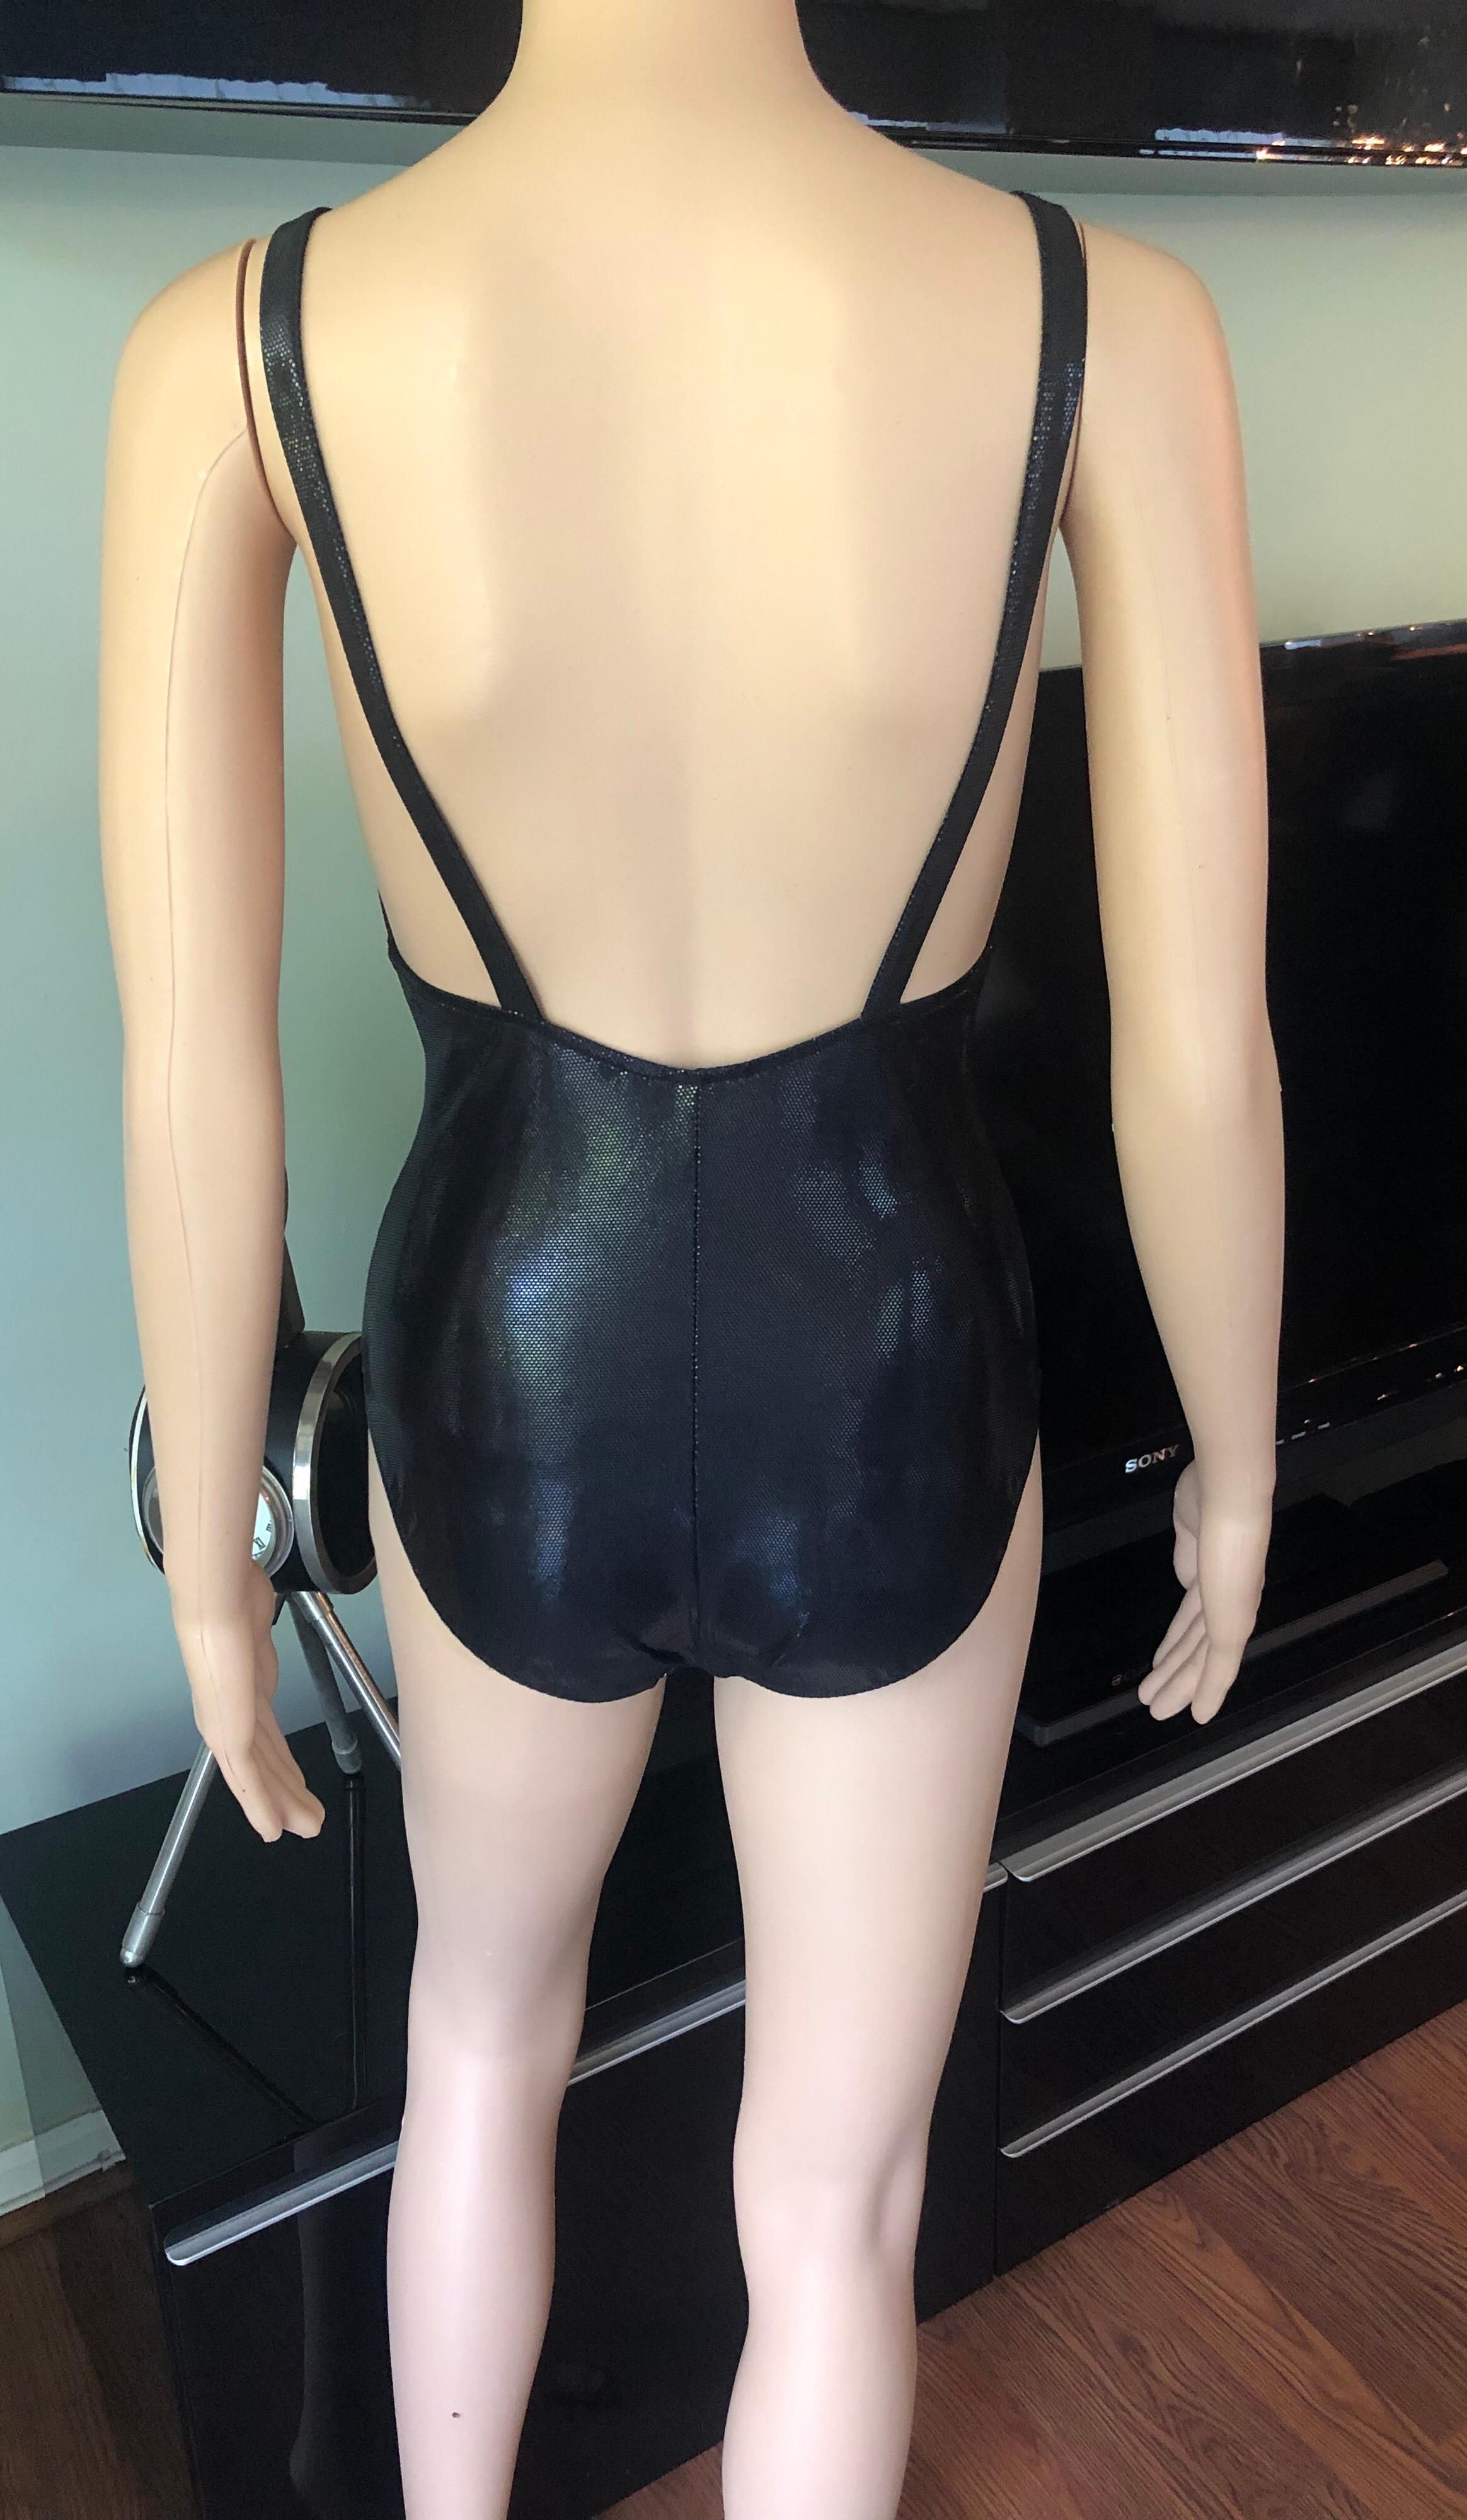 New Yves Saint Laurent YSL Plunging Open Back Metallic Wet Look Black One-Piece Swimsuit 

Yves Saint Laurent one-piece metallic black swimsuit featuring plunging neckline and open back.
